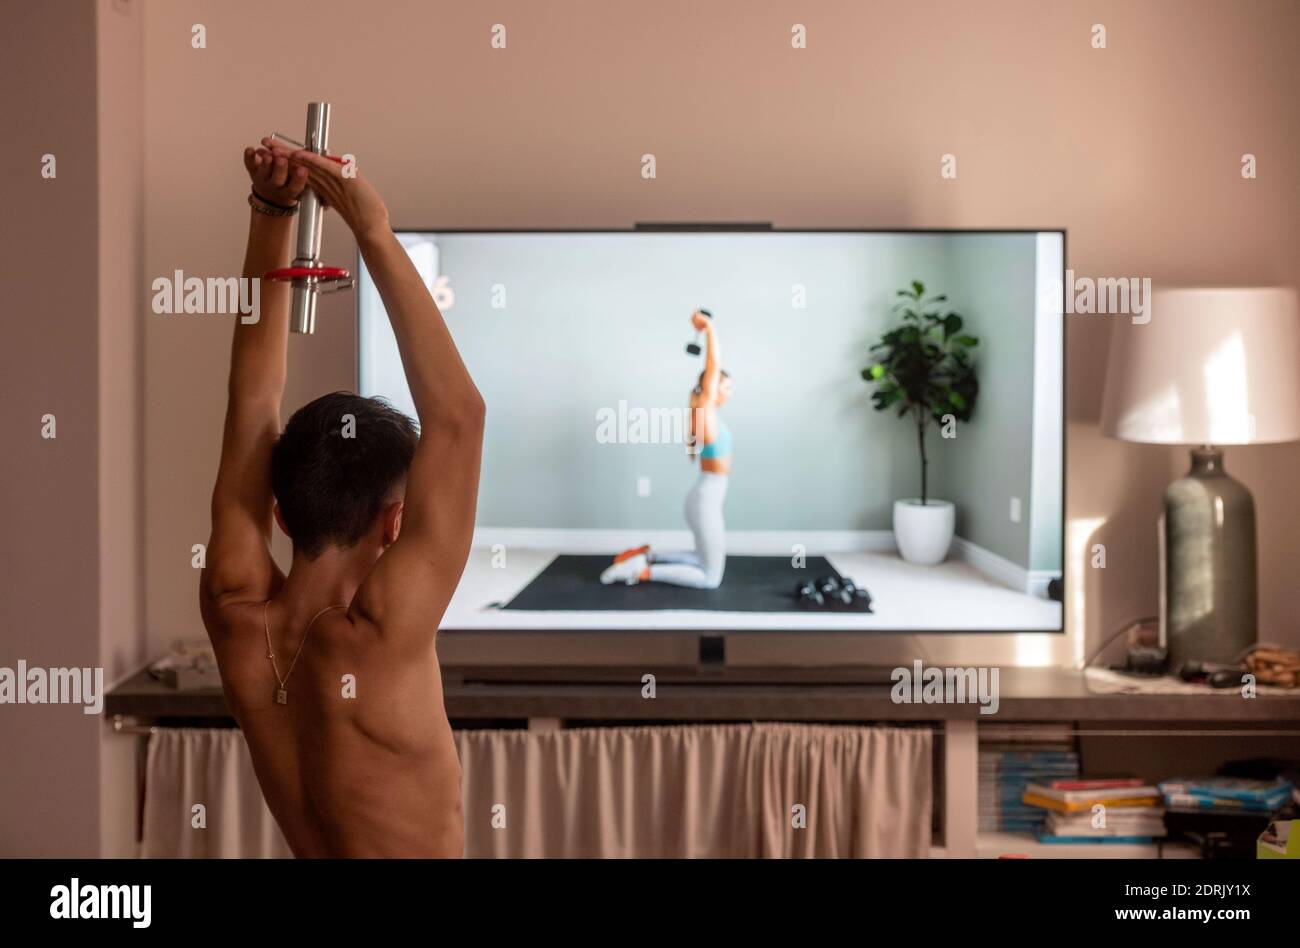 Workout in front of the TV: young man following a YouTube workout session during the lockdown due to the coronavirus / Covid-19 outbreak. Stock Photo